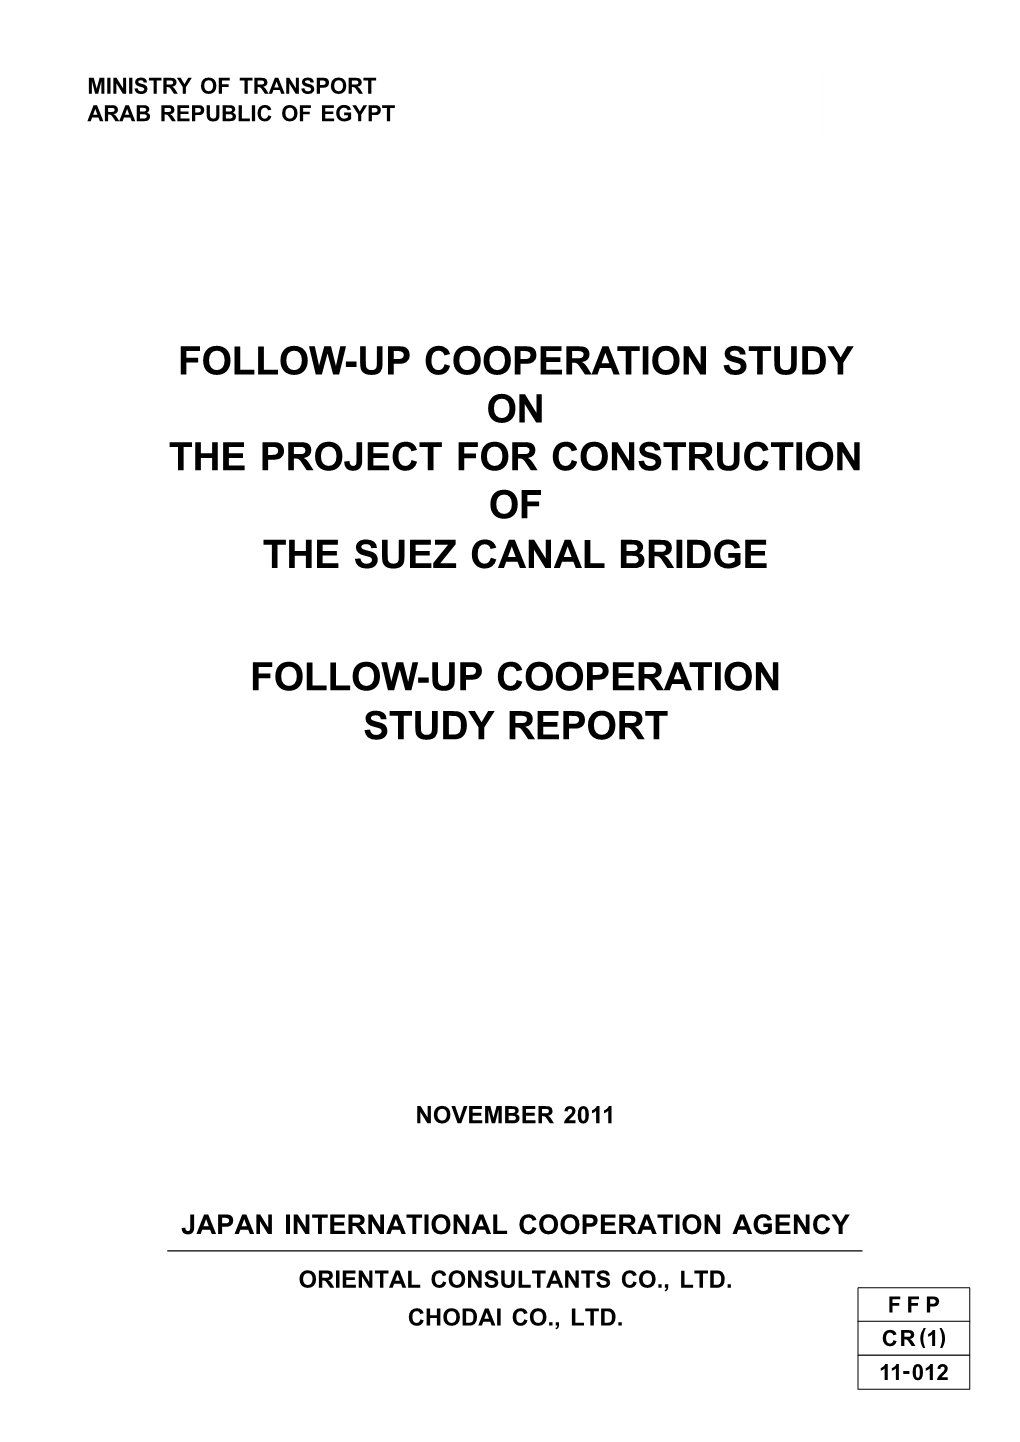 Follow-Up Cooperation Study on the Project for Construction of the Suez Canal Bridge